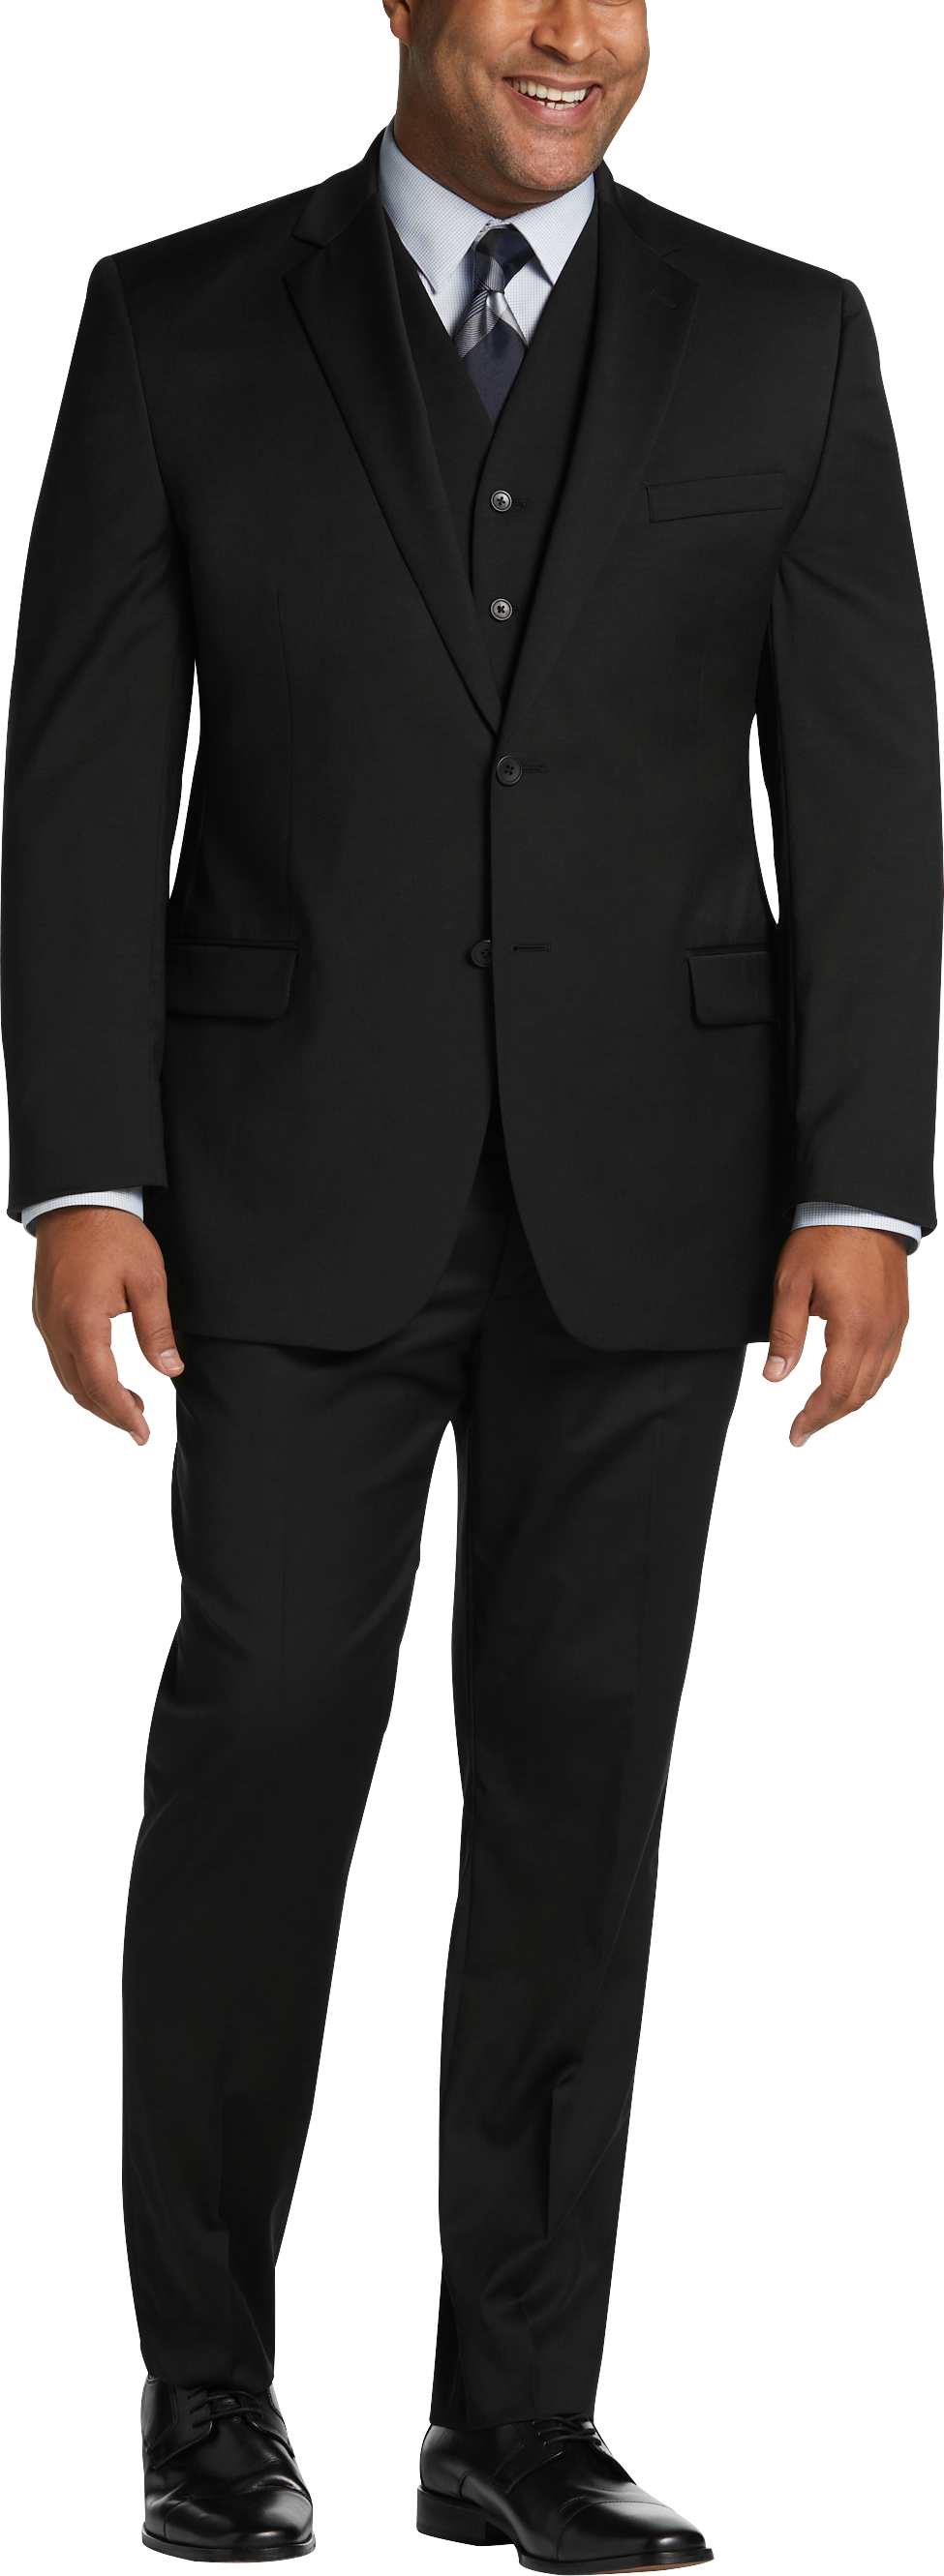 Awearness Kenneth Cole Modern Fit Suit, Black